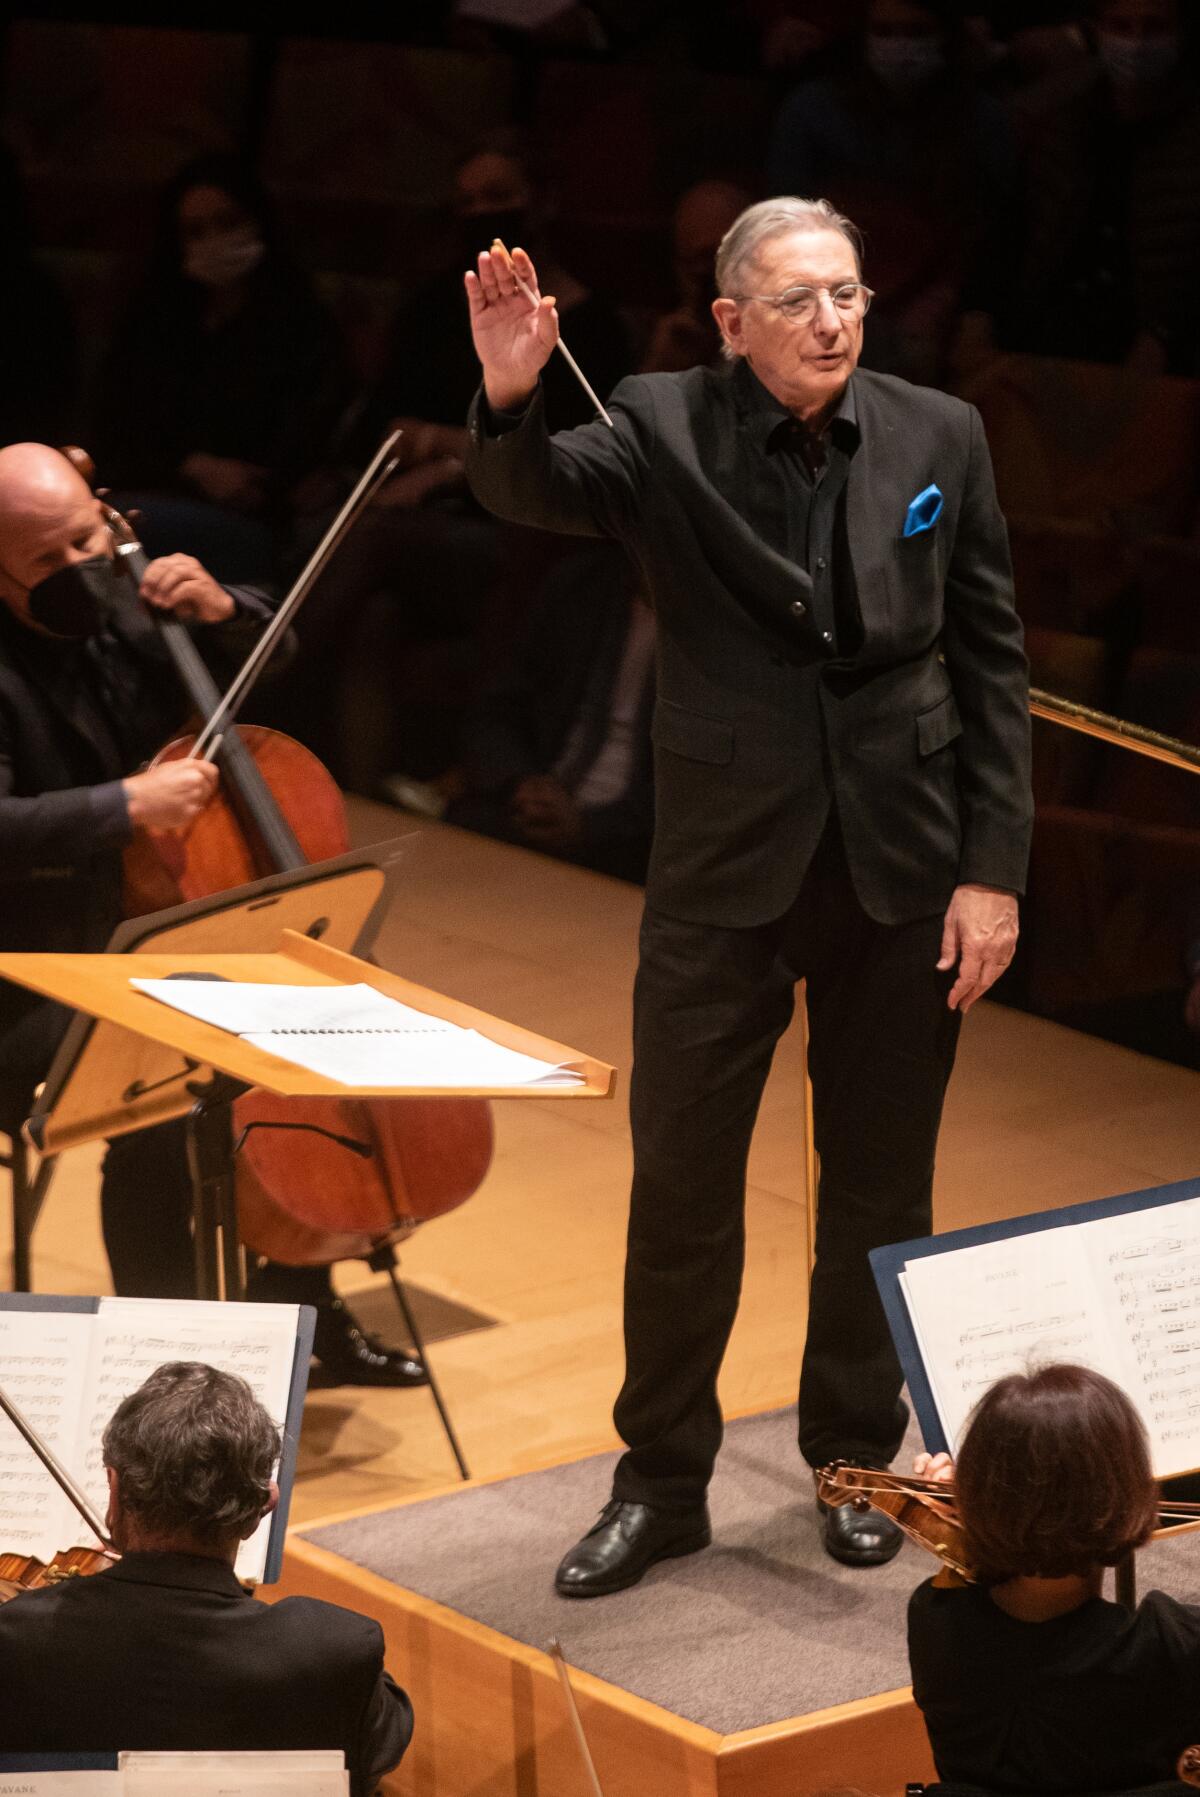 Michael Tilson Thomas on his first night back conducting the L.A. Phil at Walt Disney Concert Hall since brain surgery.